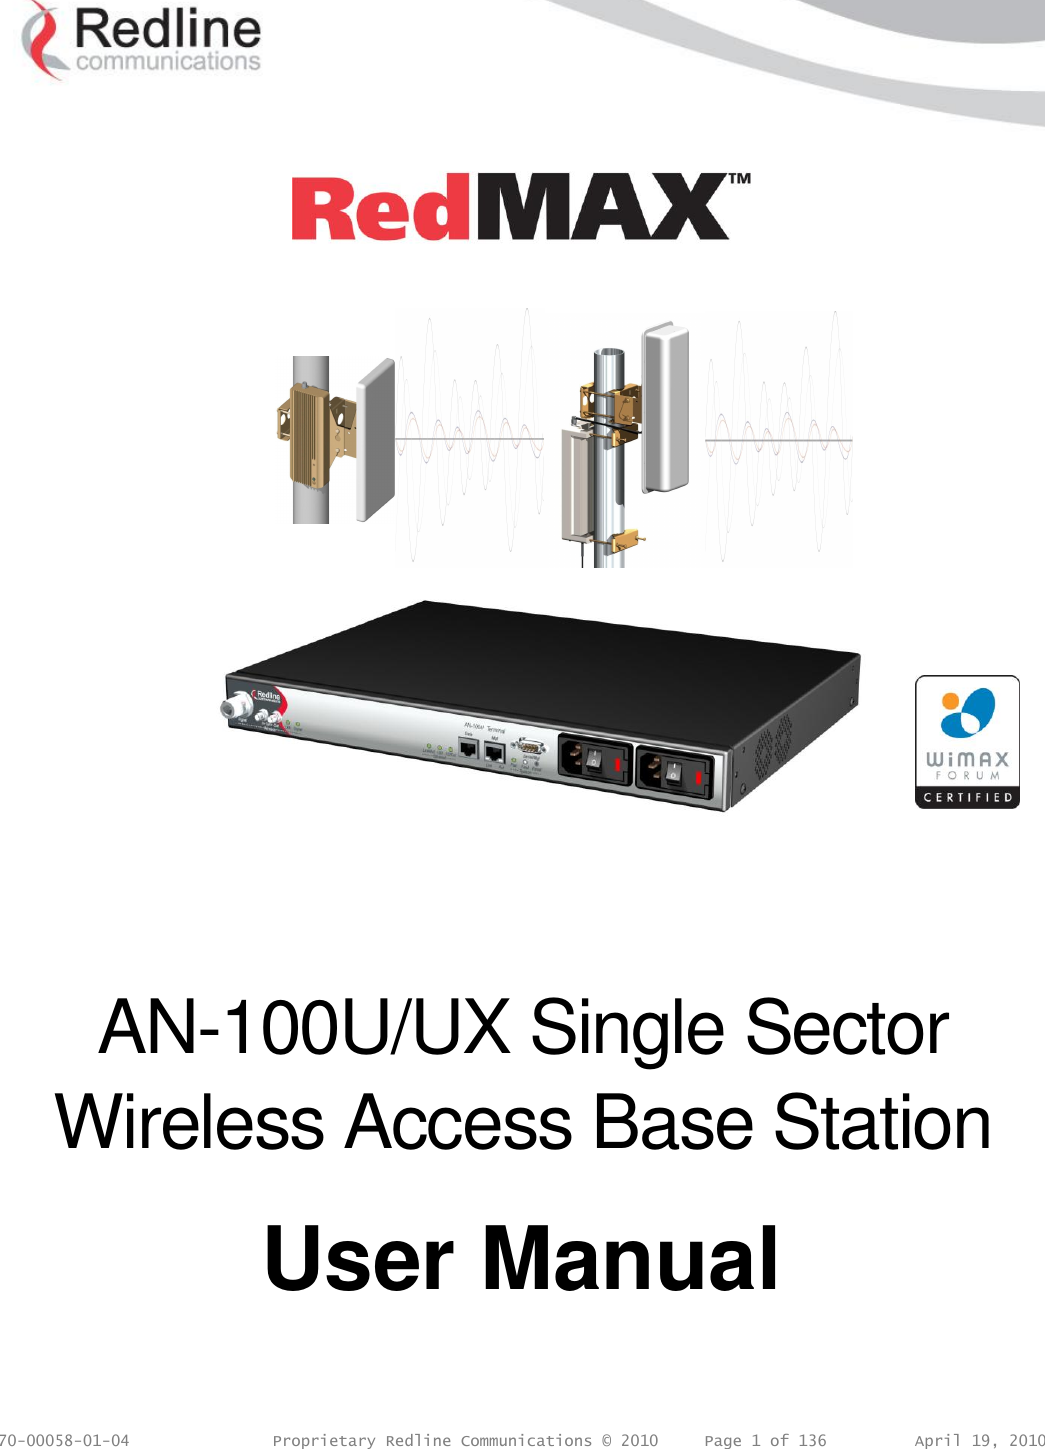  70-00058-01-04  Proprietary Redline Communications © 2010   Page 1 of 136  April 19, 2010         AN-100U/UX Single Sector Wireless Access Base Station  User Manual  